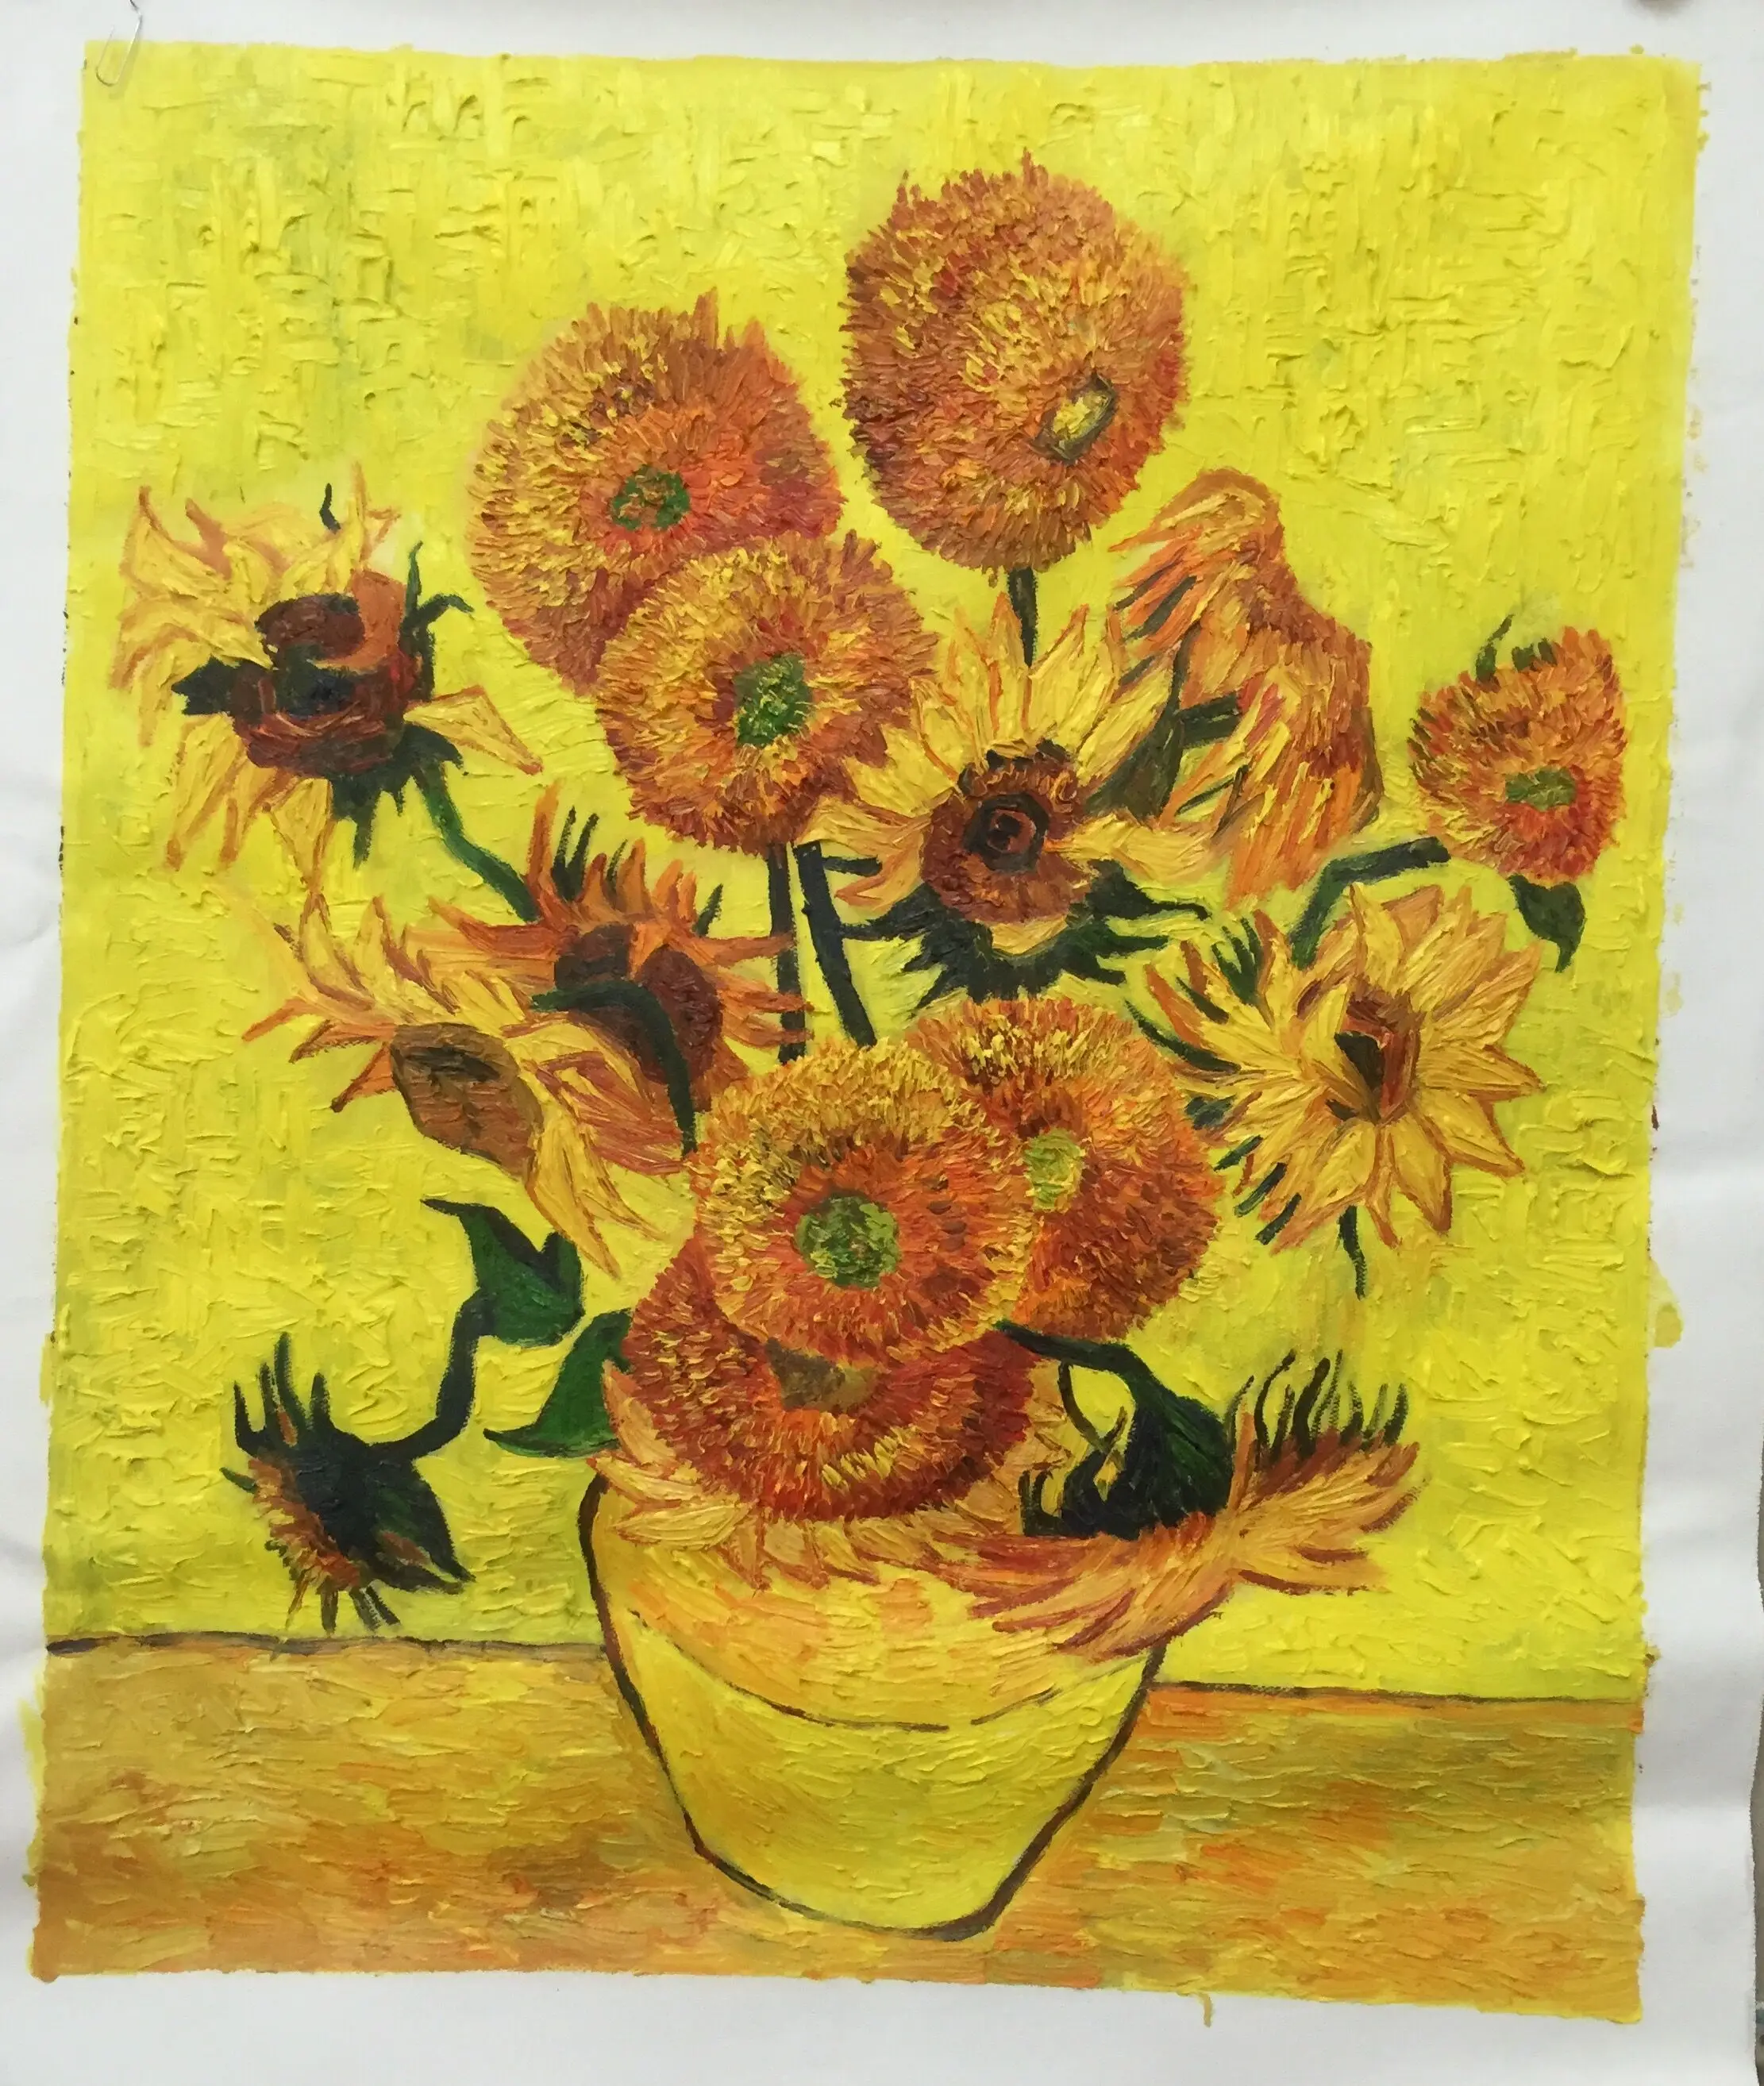 Pure hand-painted high imitation oil painting world famous painting Van Gogh flower living room European decorative painting han